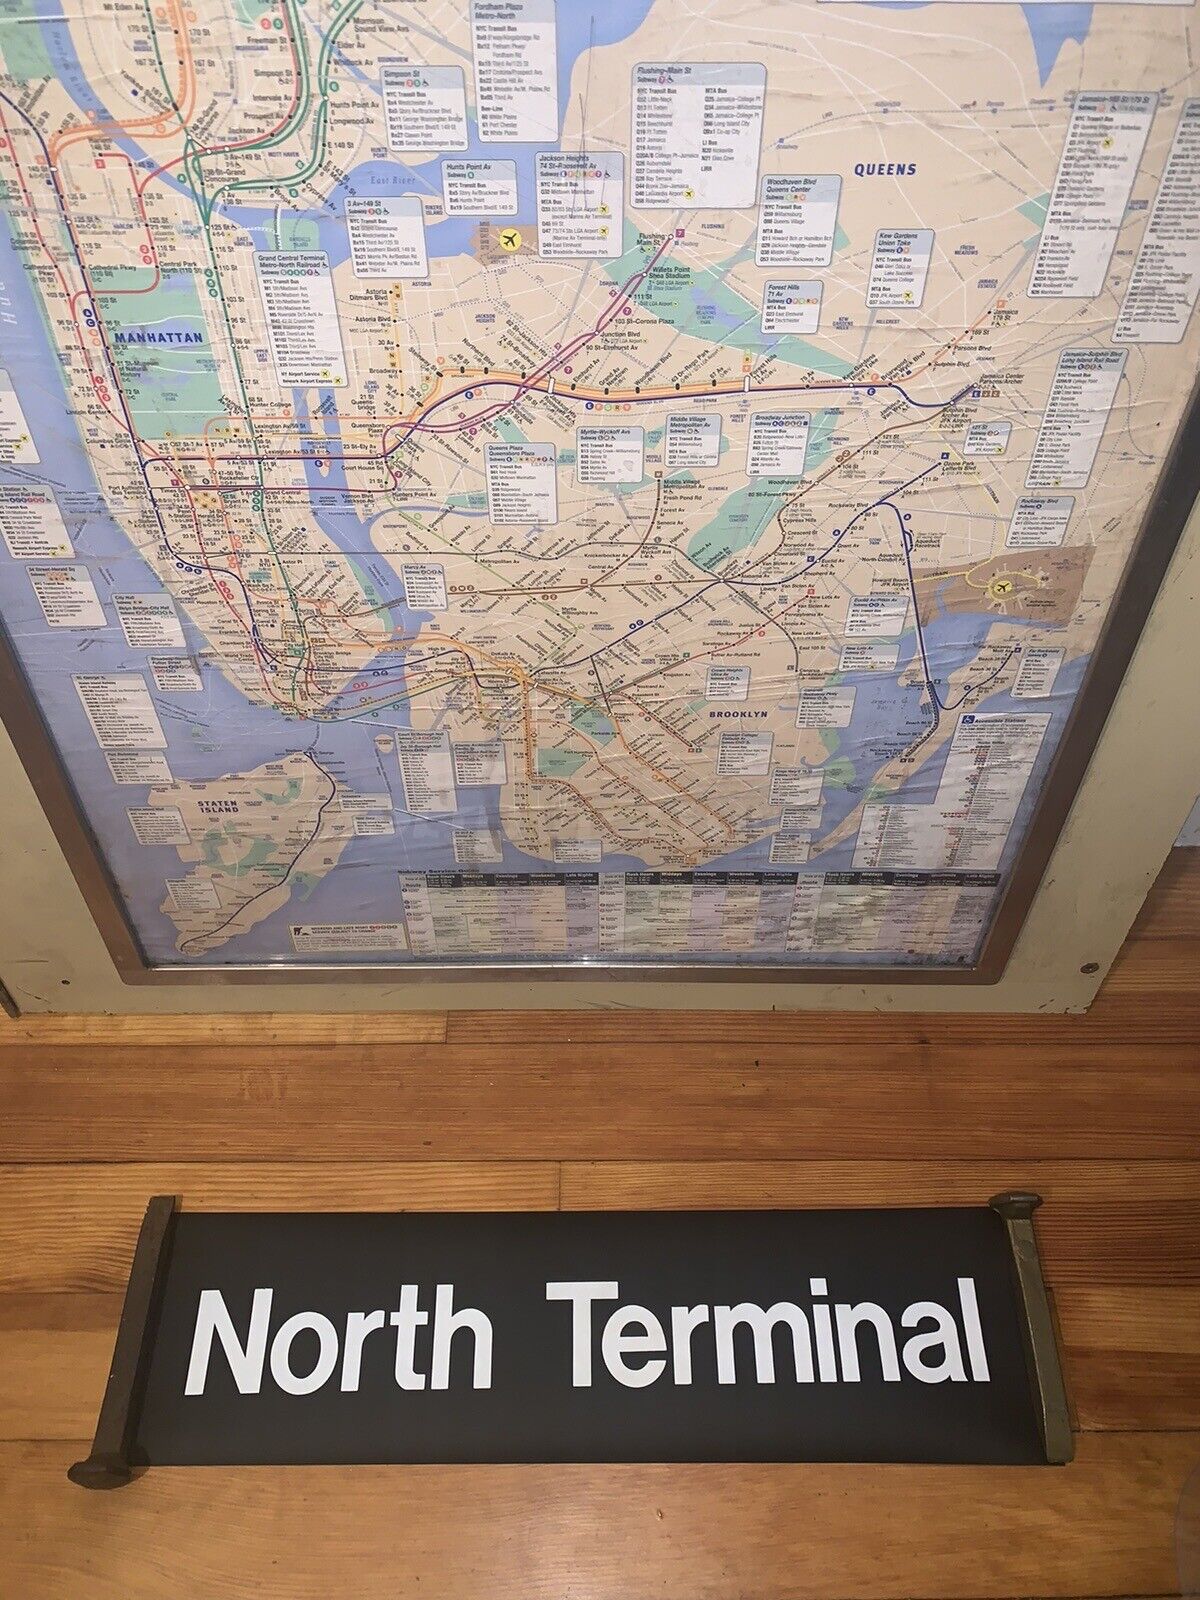 R32 NY NYC SUBWAY ROLL SIGN METRO NORTH TERMINAL GRAND CENTRAL STATION BROADWAY